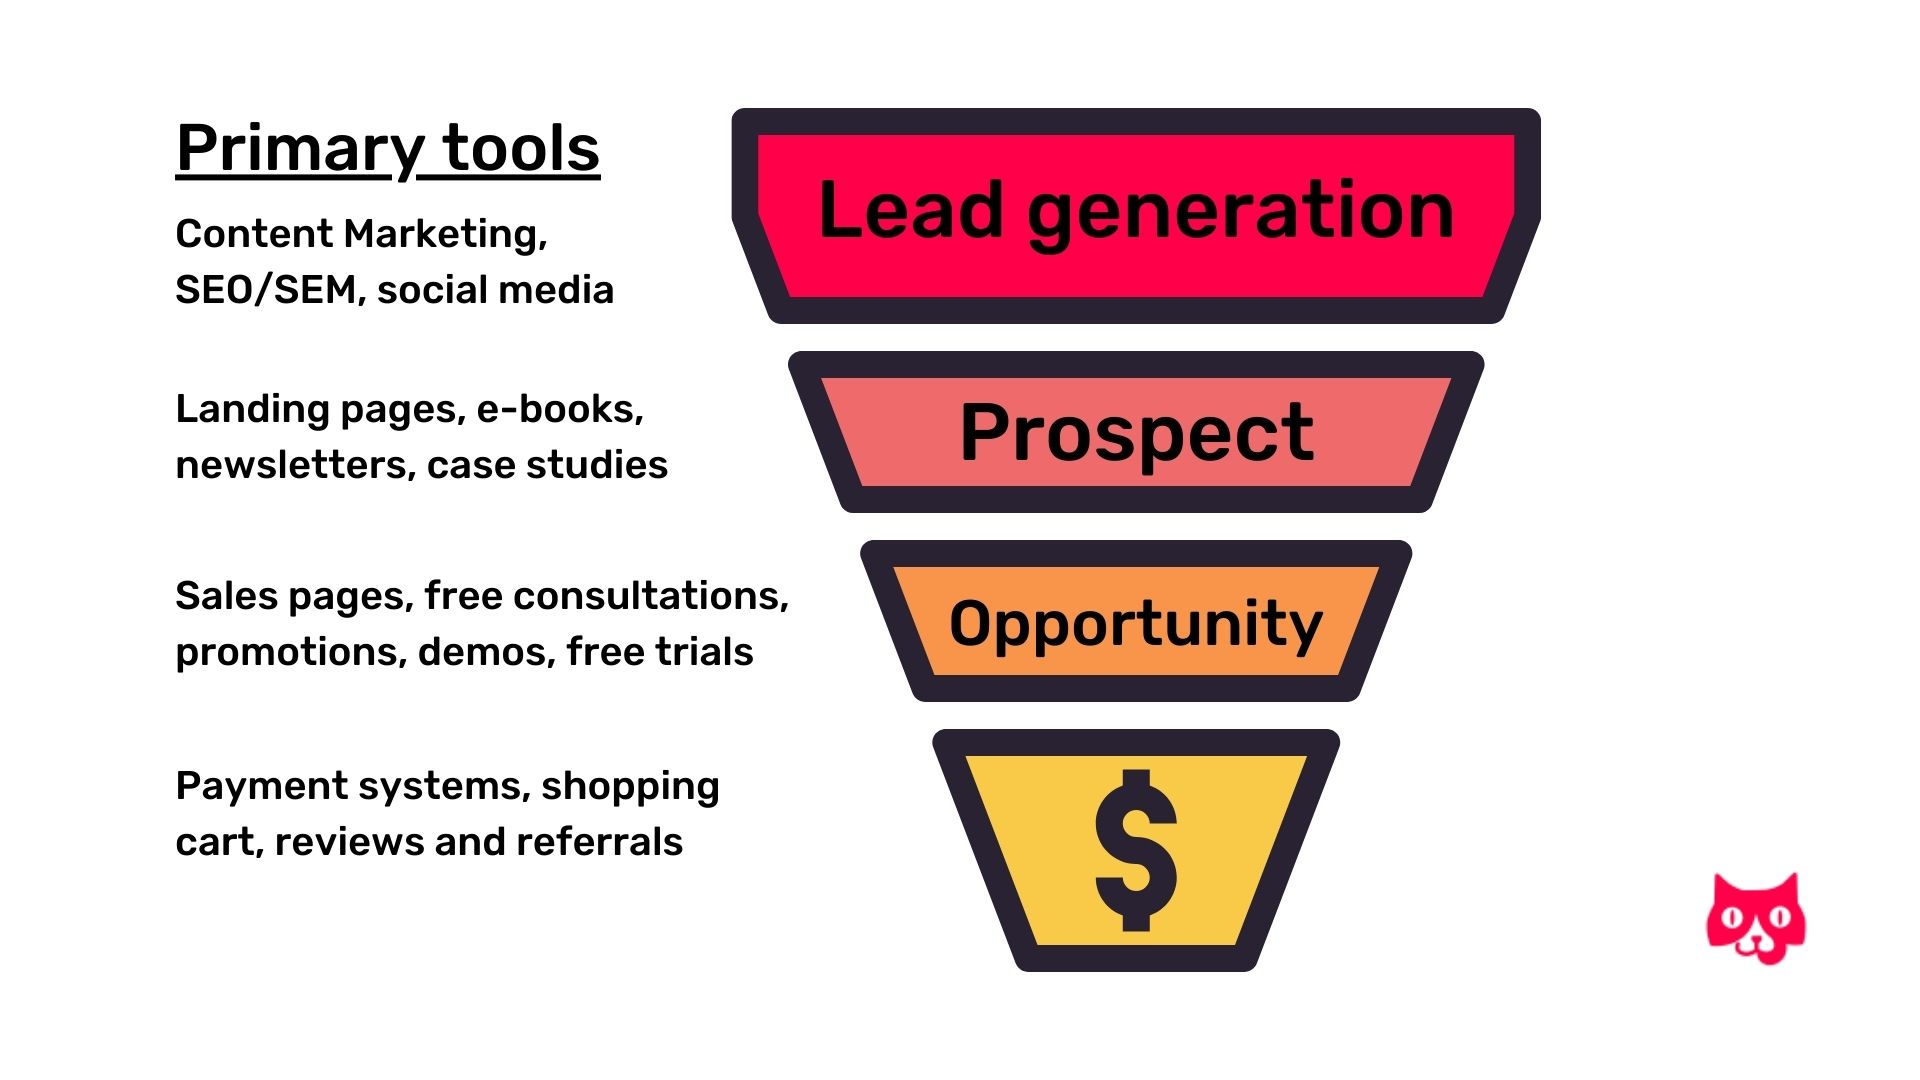 This funnel shows the different stages at which marketers should use different content marketing metrics and other tools to help customers through the marketing funnel from lead, to prospect, to opportunity, until finally they are a customer.